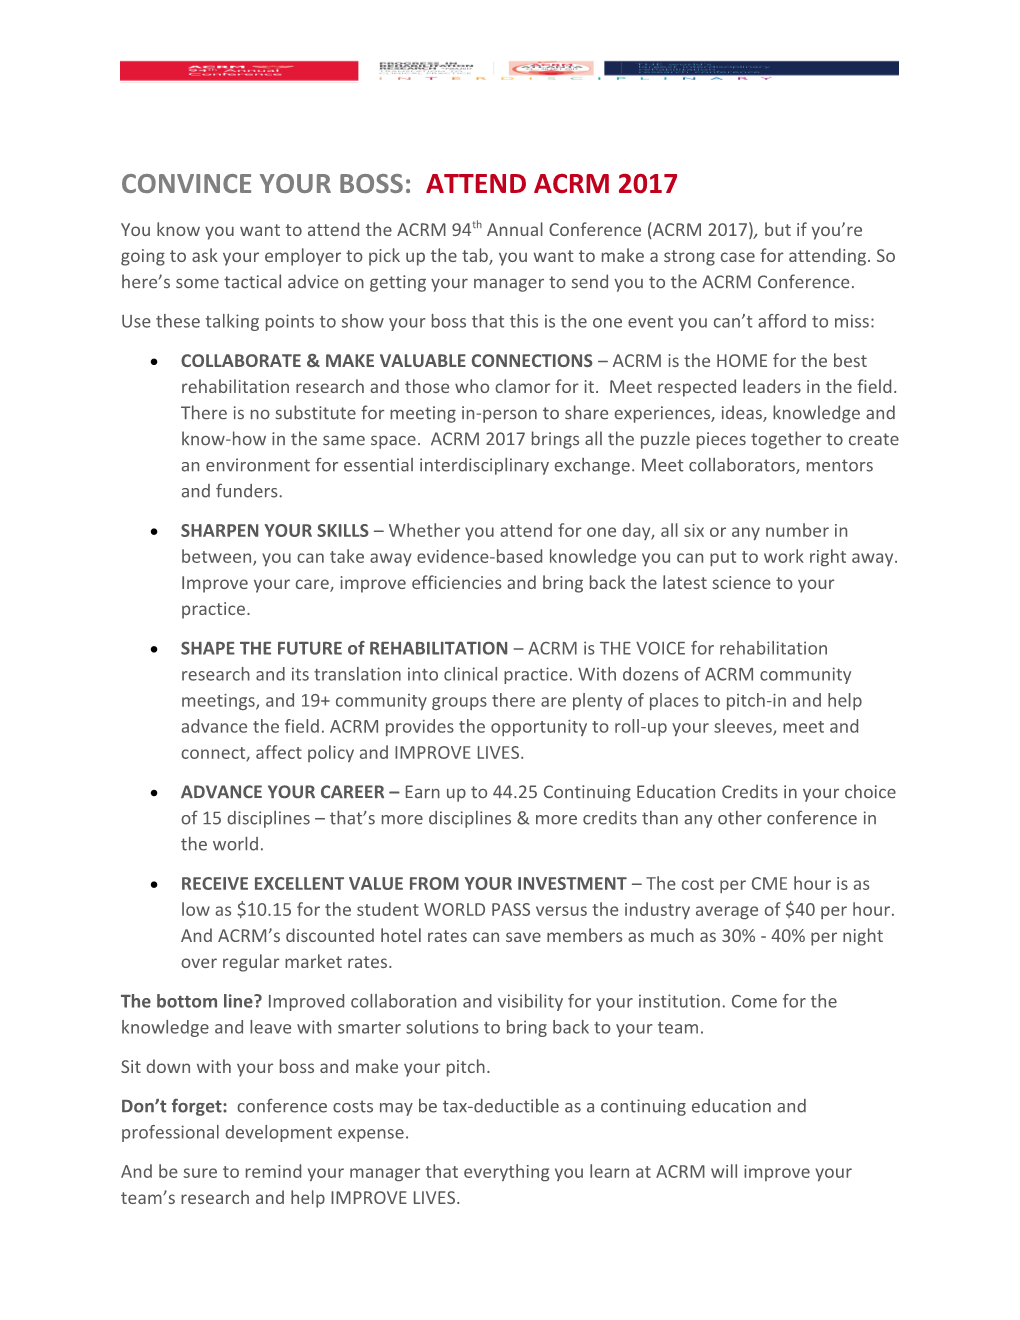 Convince Your Boss: Attend ACRM 2017